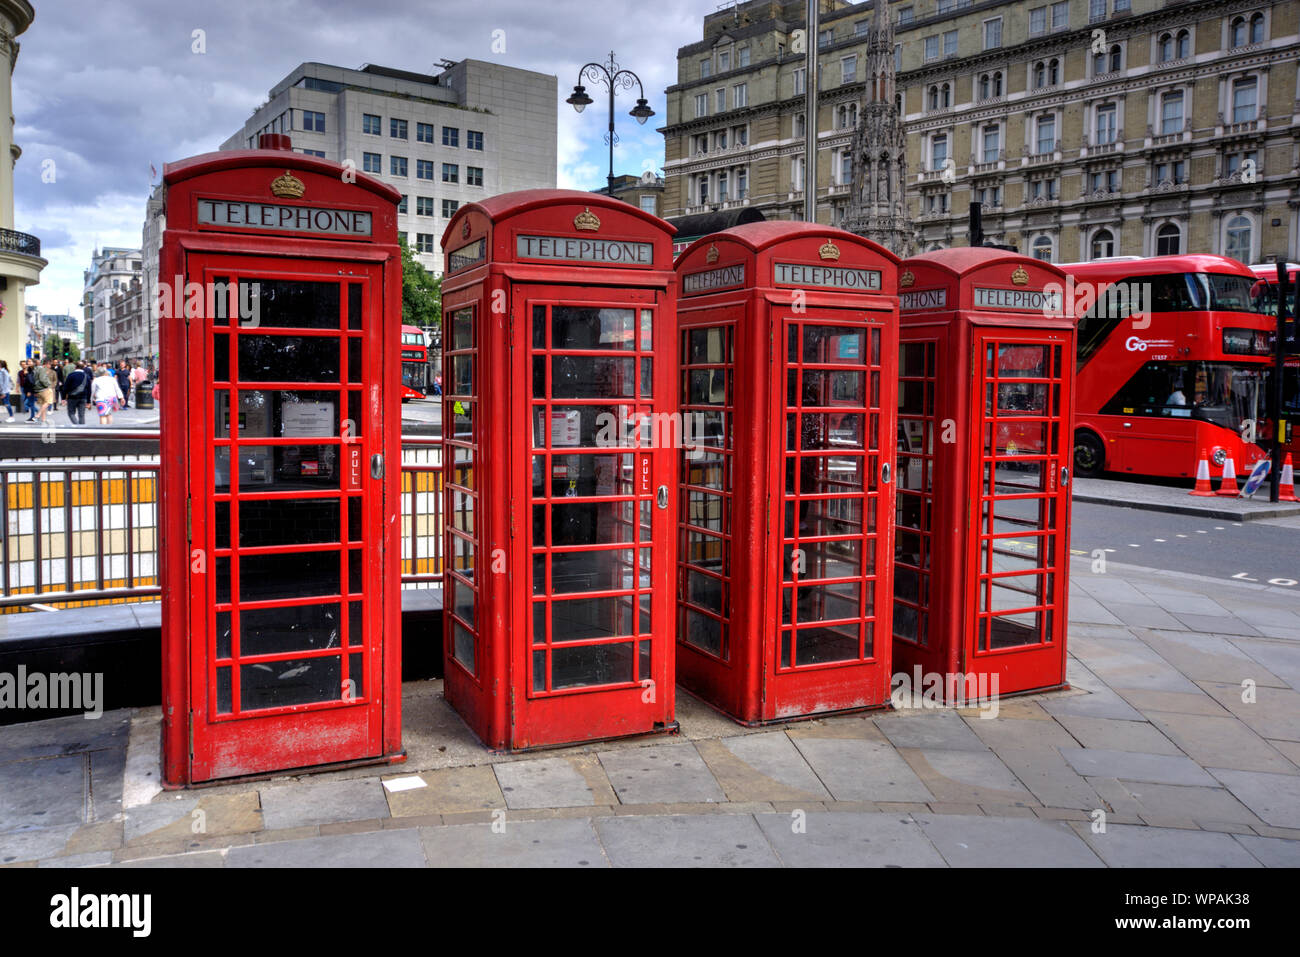 London, United Kingdom - September 7 15, 2019: Four iconic red telephone boxes in a row in Charing Cross central London with red buses in background Stock Photo